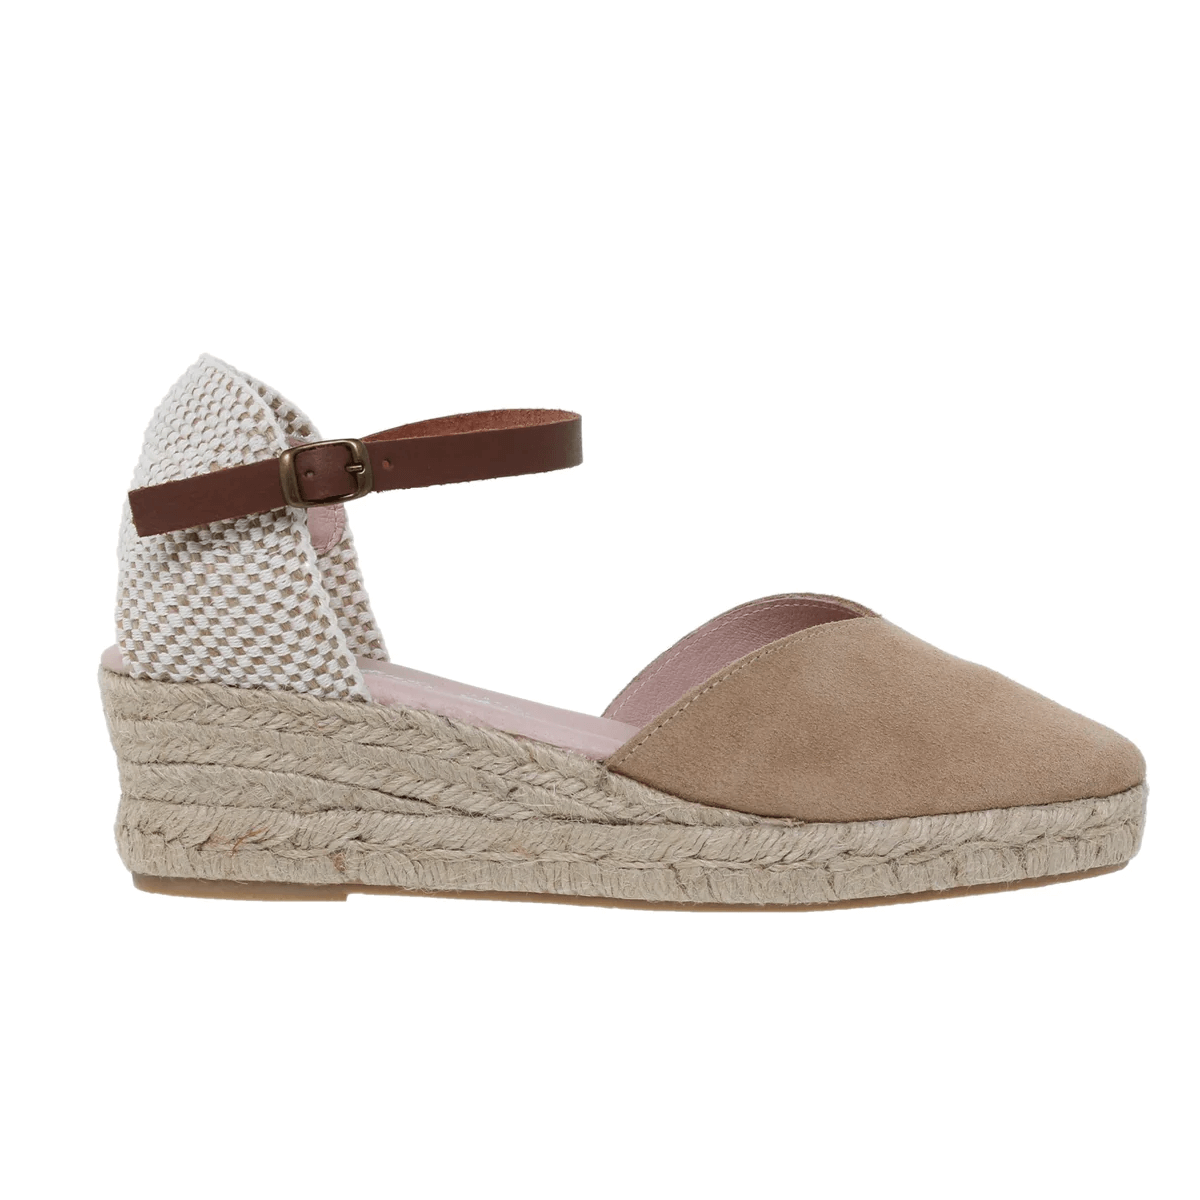 Beige leather espadrilles by Amelie